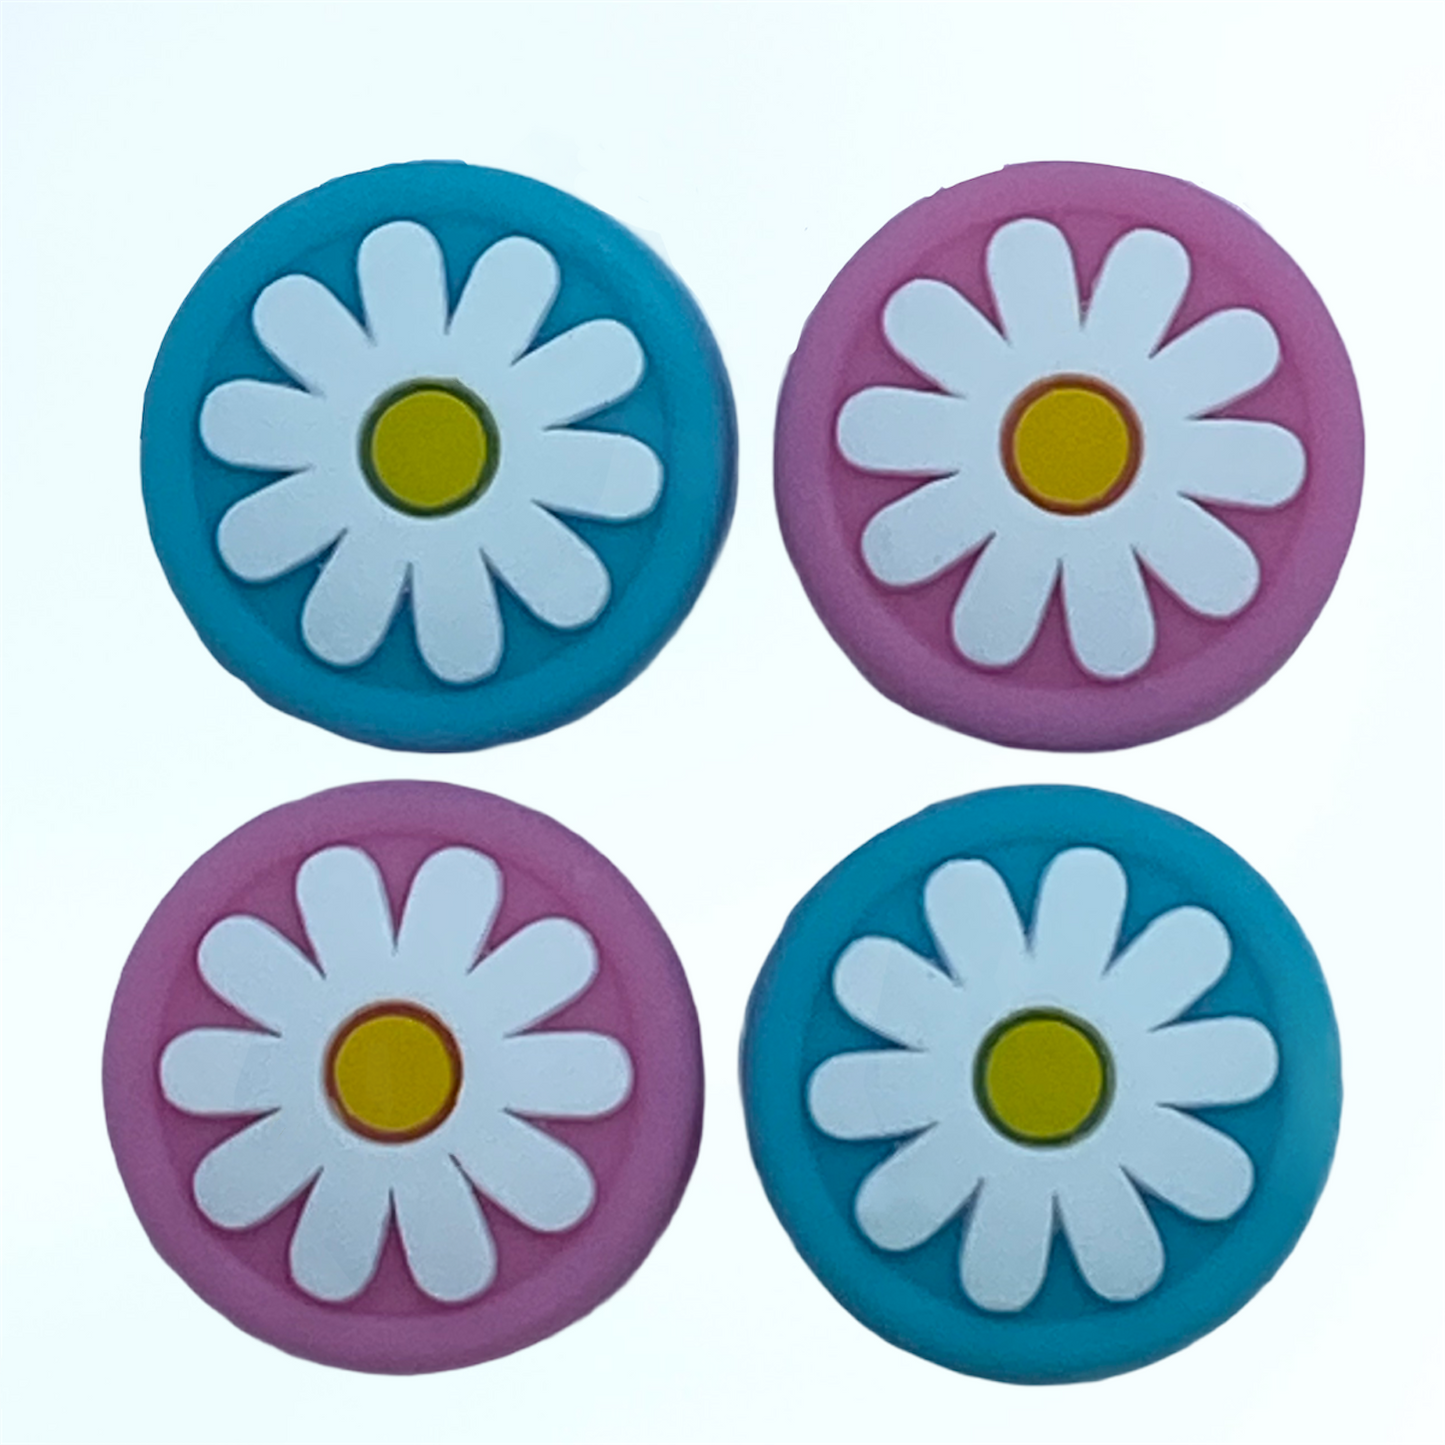 JenDore Pink & Blue 4Pcs Flower #2 Silicone Thumb Grip Caps for Nintendo Switch